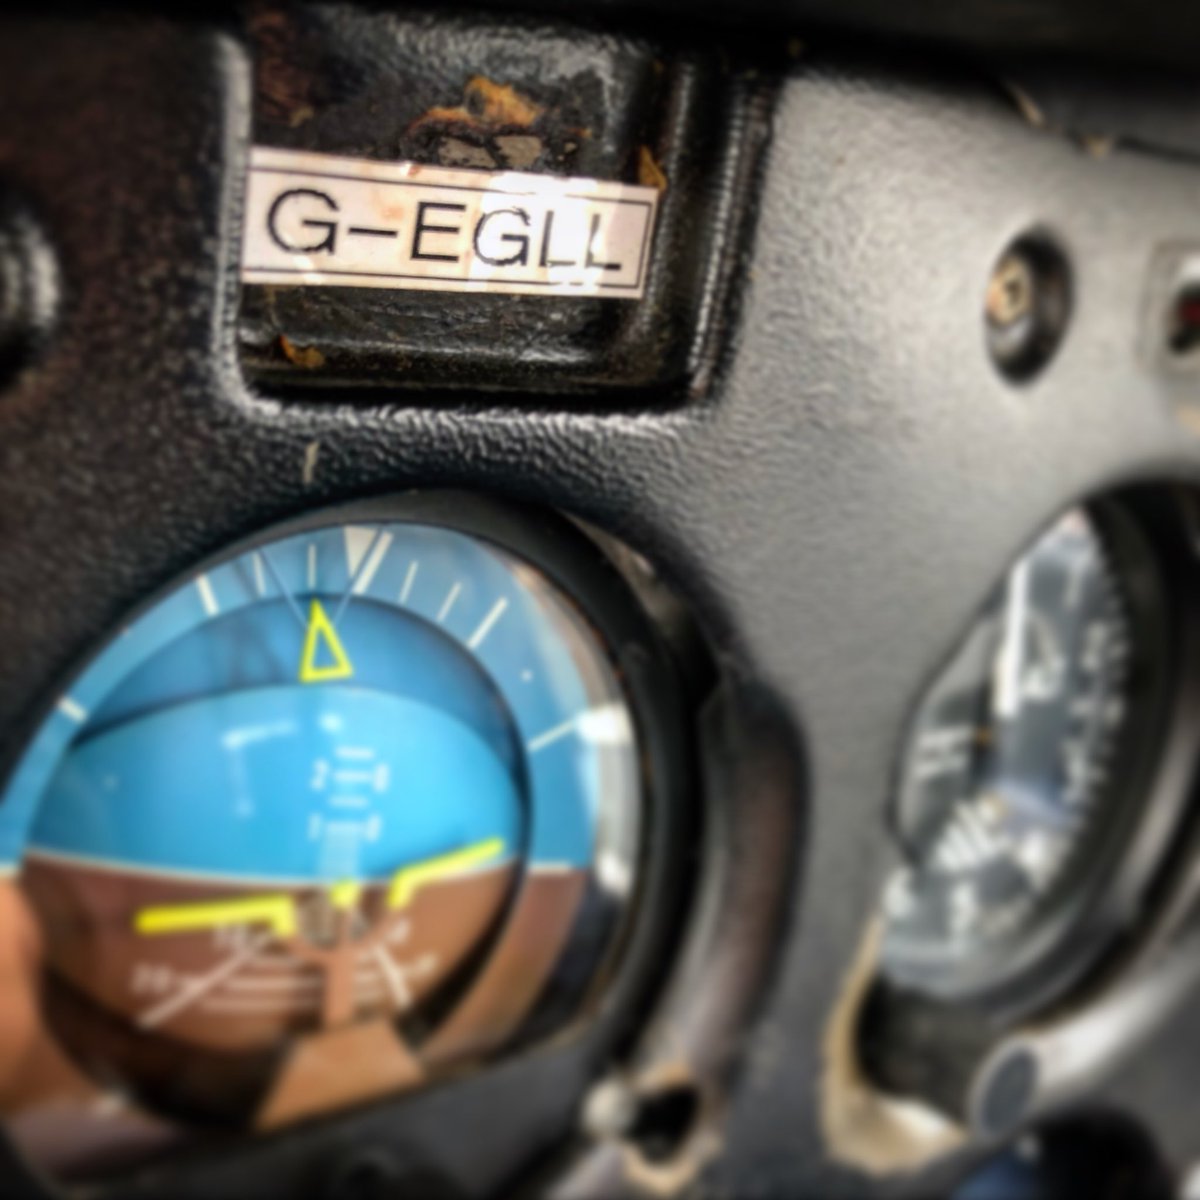 6 landings in G-EGLL today - much more consistent and really enjoyed the flight. Marching towards my first solo flight now - maybe next lesson, eek! #avgeek #studentpilot #bookeraviation